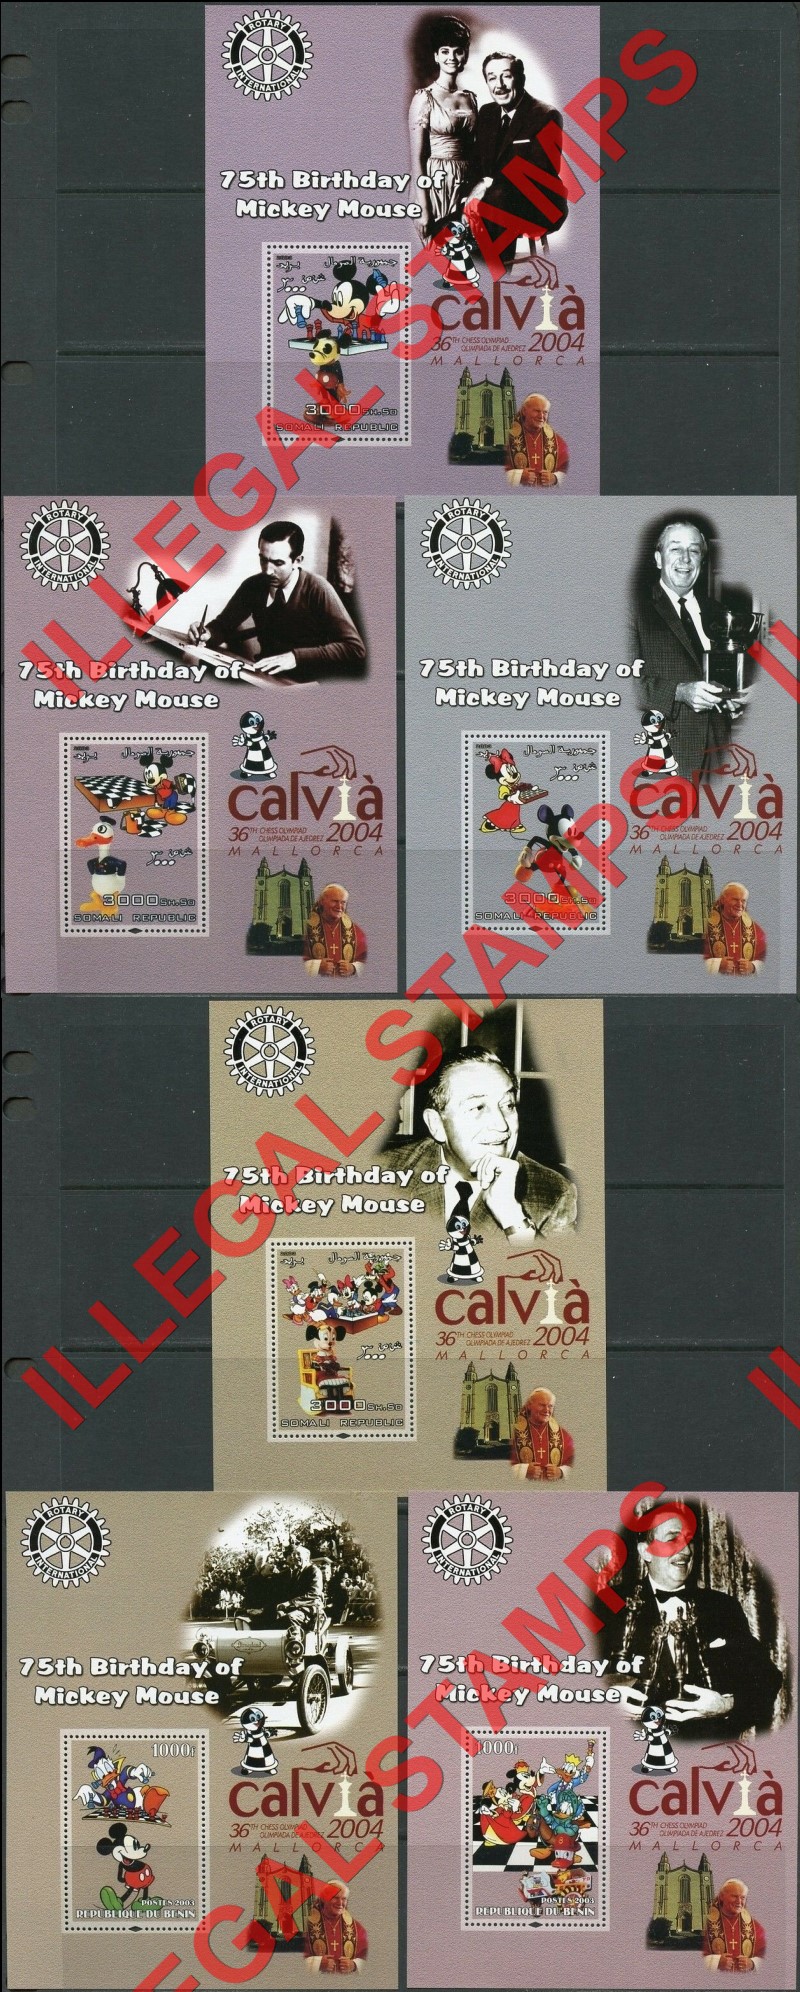 Somalia 2003 Mickey Mouse 75th Birthday Chess with Walt Disney Illegal Stamp Souvenir Sheets of 1 (Part 1)